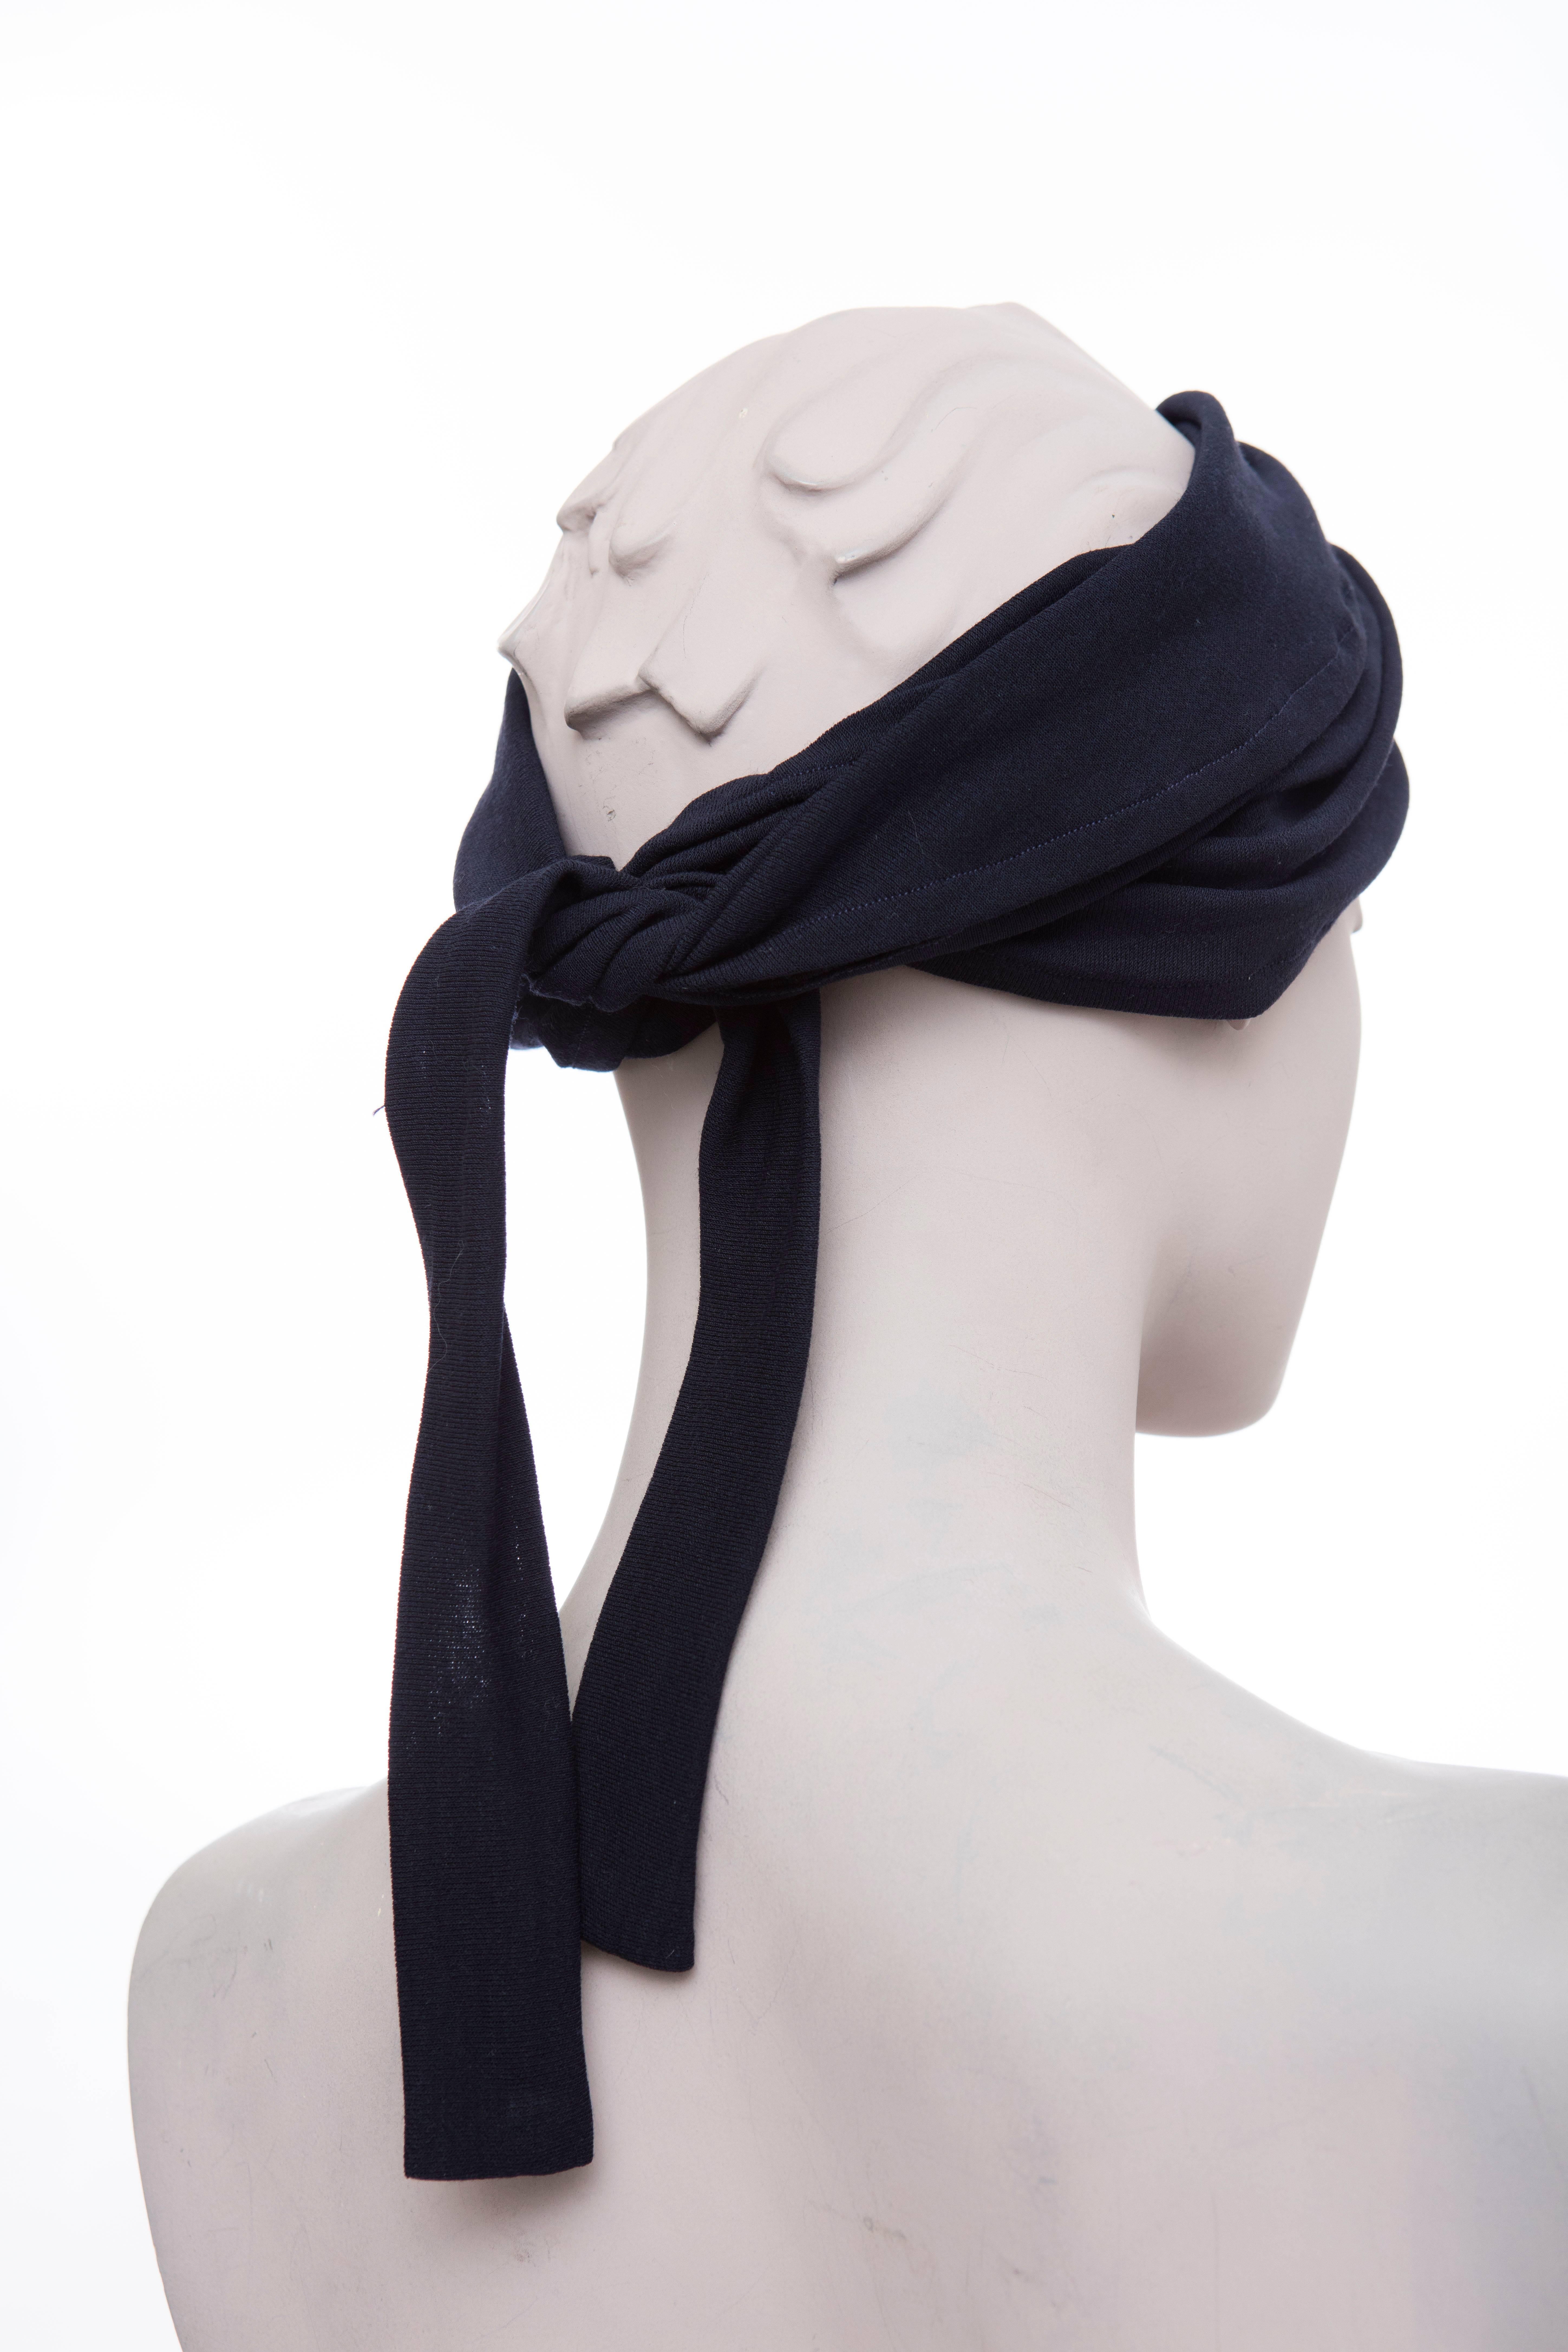 Maeve Carr For Donna Karan Navy Blue Jersey Turban, Circa 1980's In Excellent Condition For Sale In Cincinnati, OH